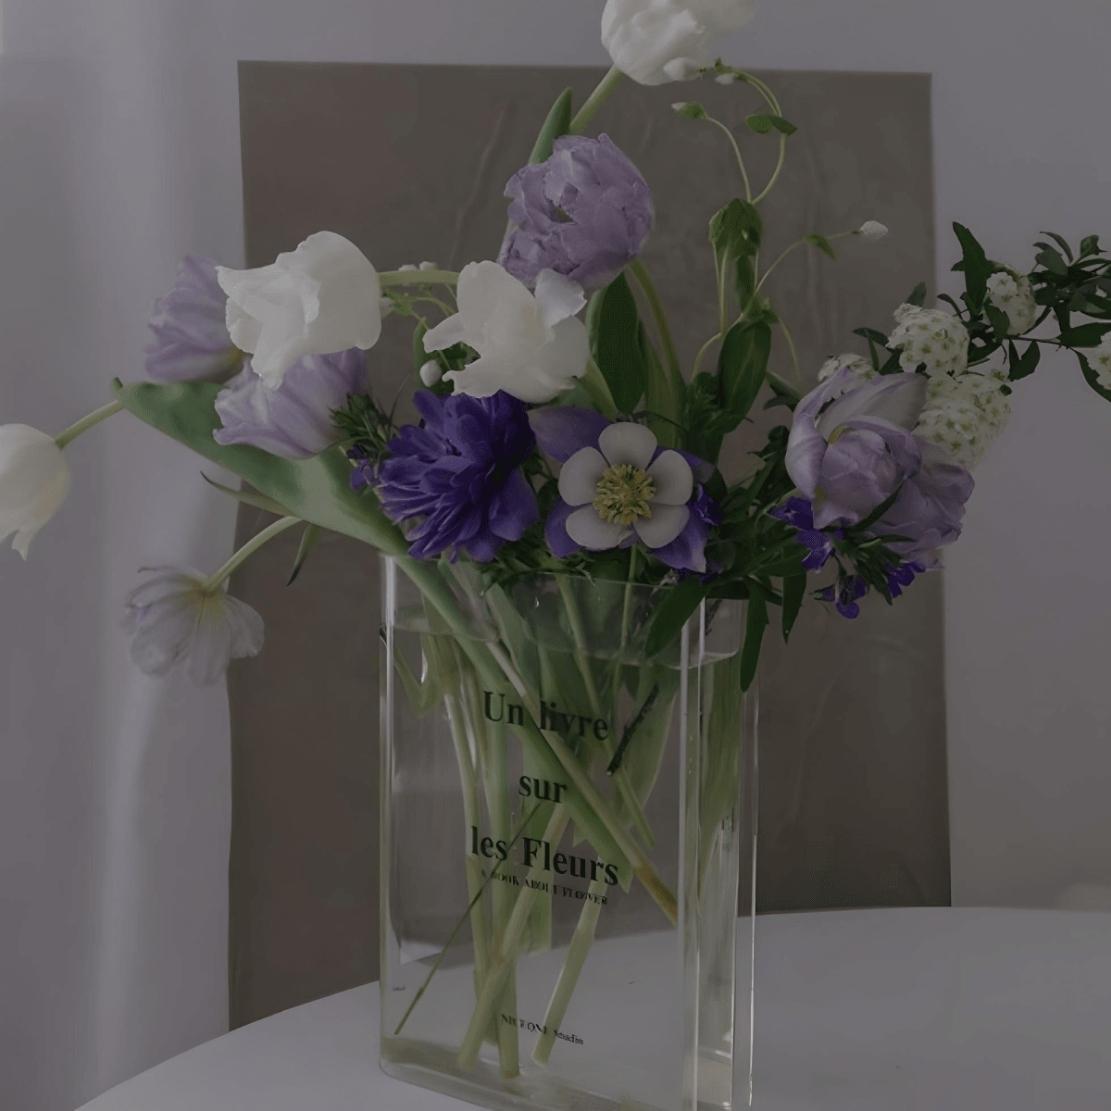 Transparent acrylic book vase with text and purple flower bouquet